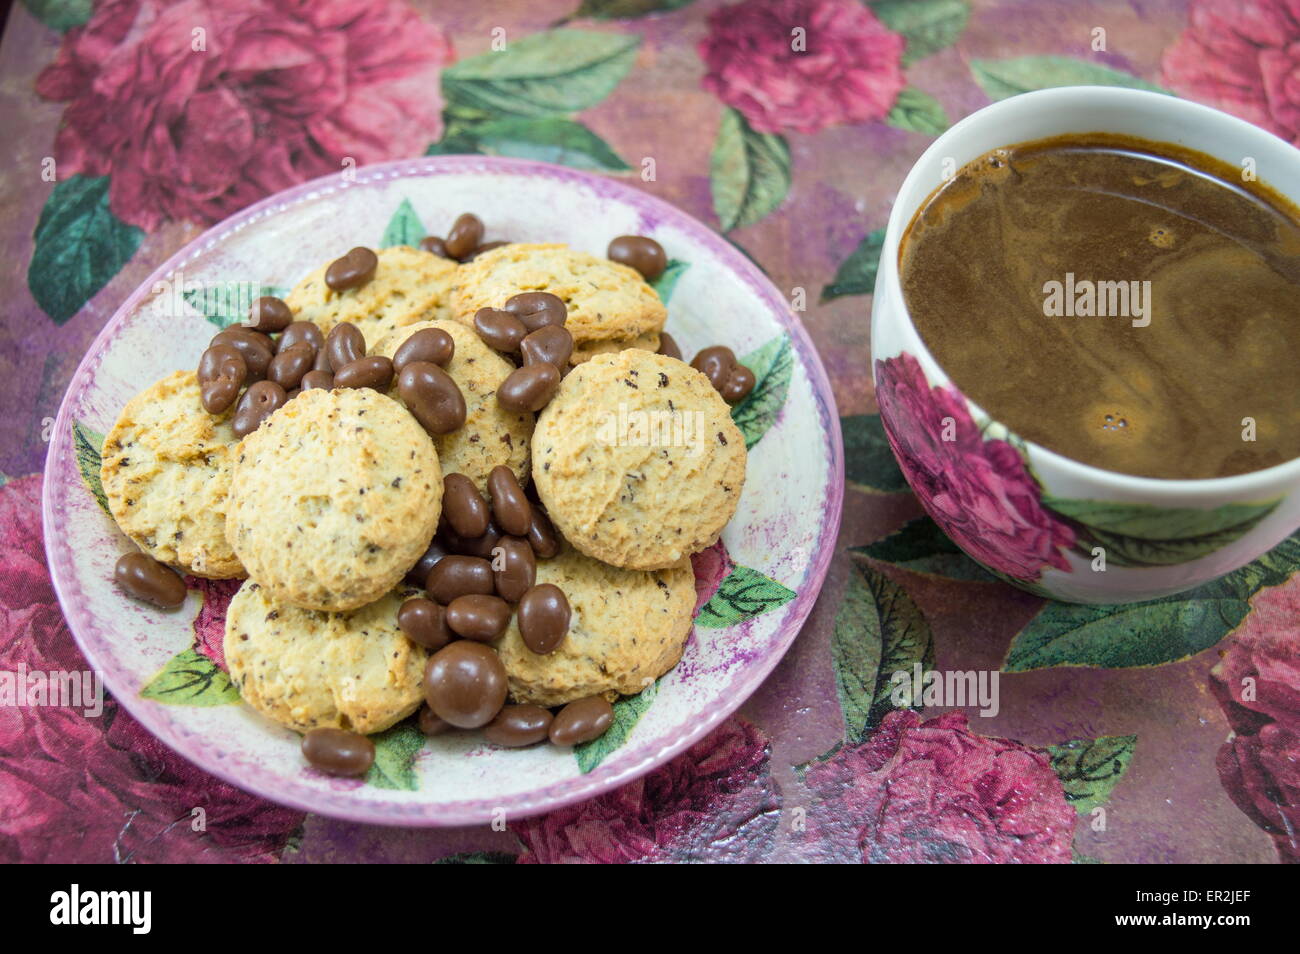 Integral cookies and chocolate balls on a colorful coffee table with flowers Stock Photo